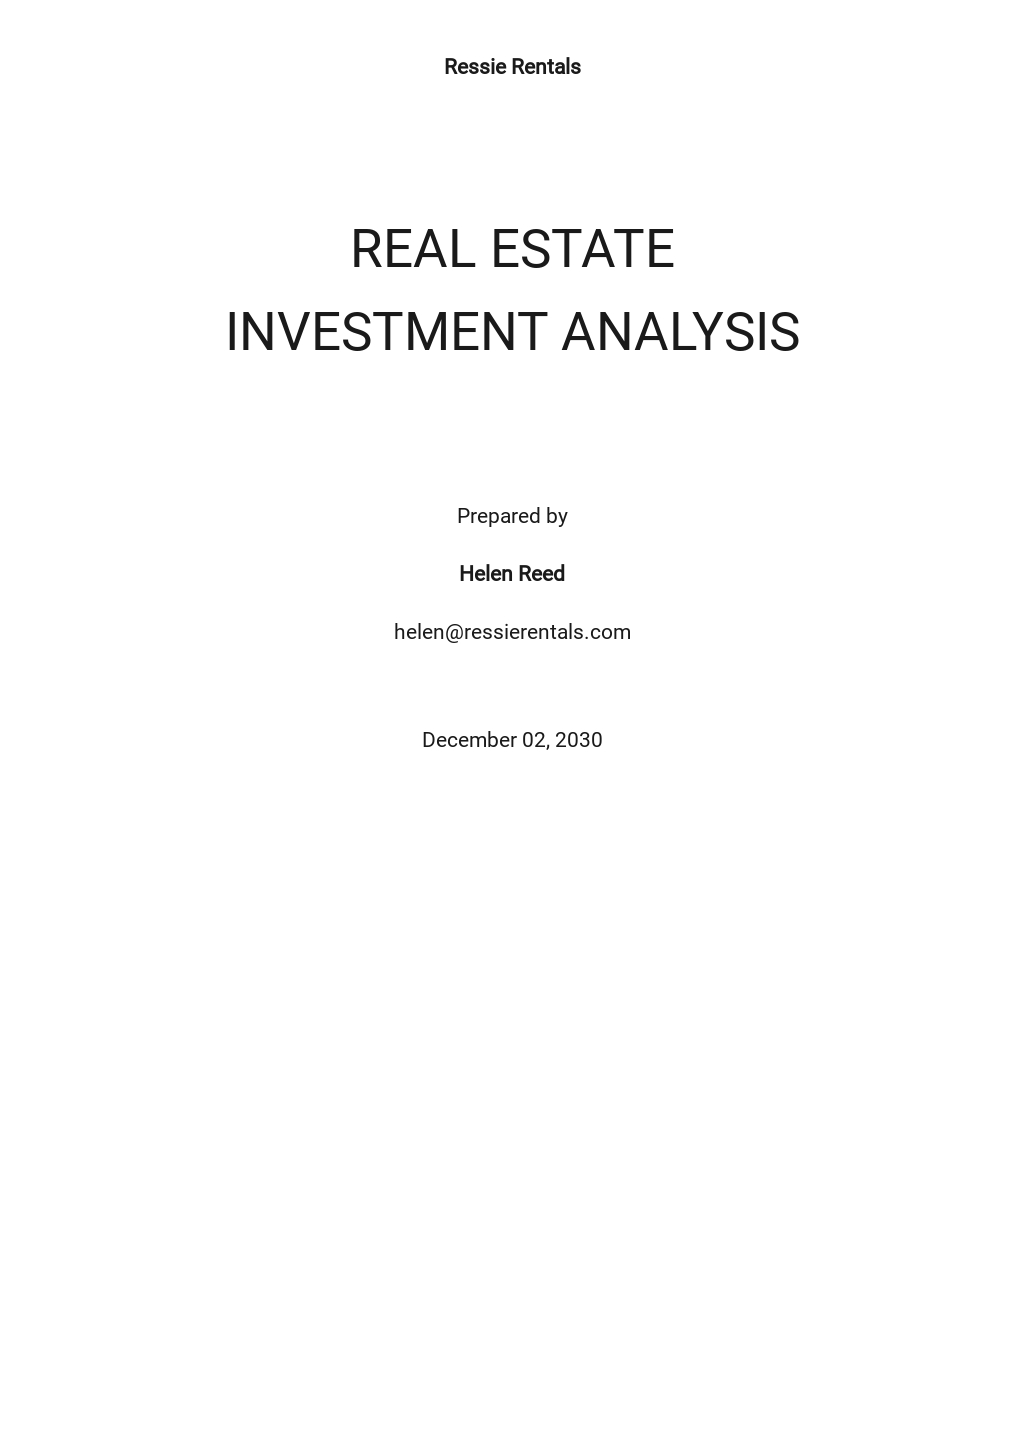 Real Estate Investment Analysis Template.jpe